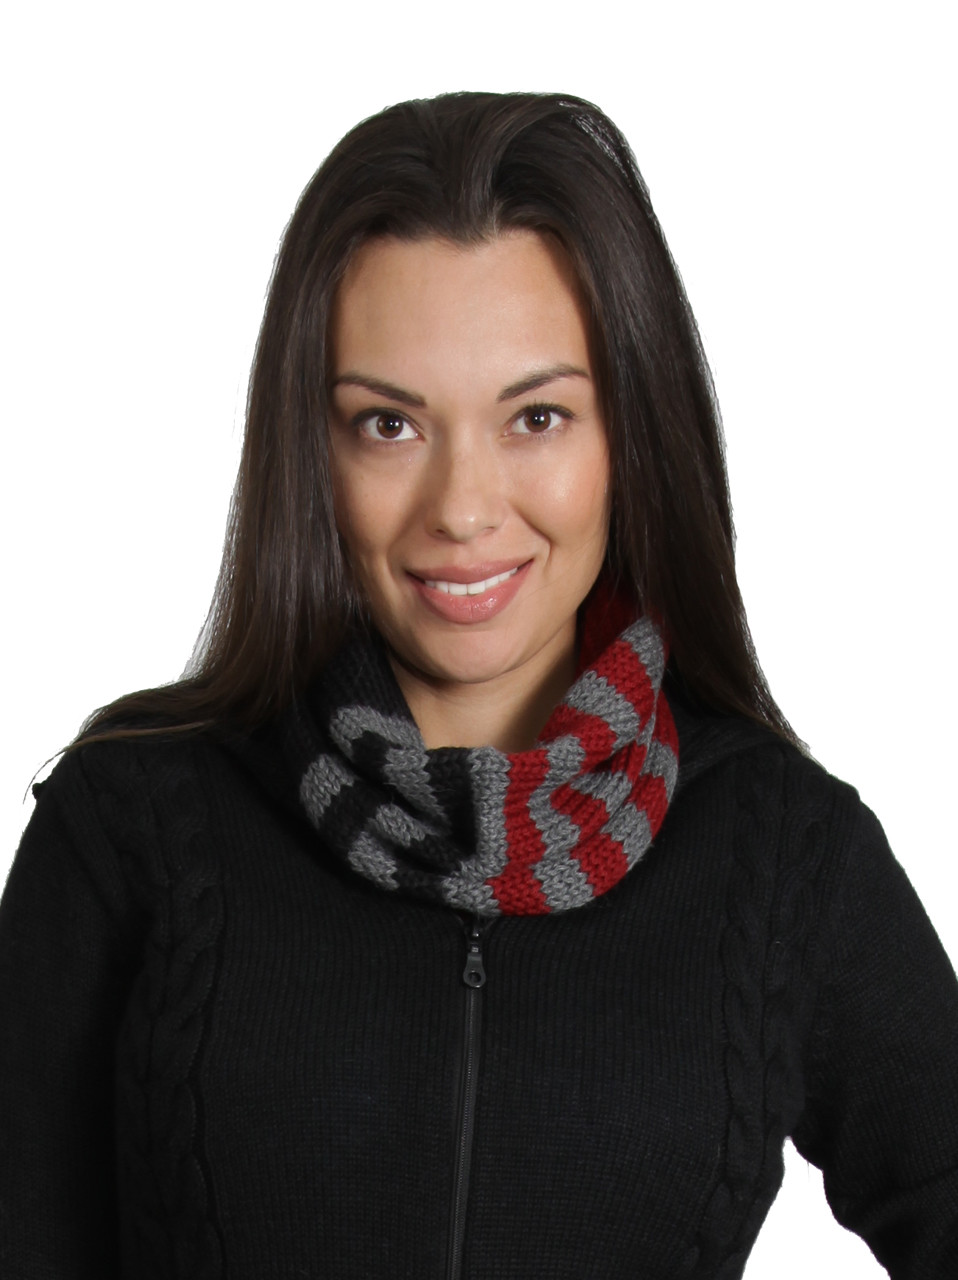 Women Colorful Neck Scarf Winter Knitted Loop Scarf Warm Wrap Cowl